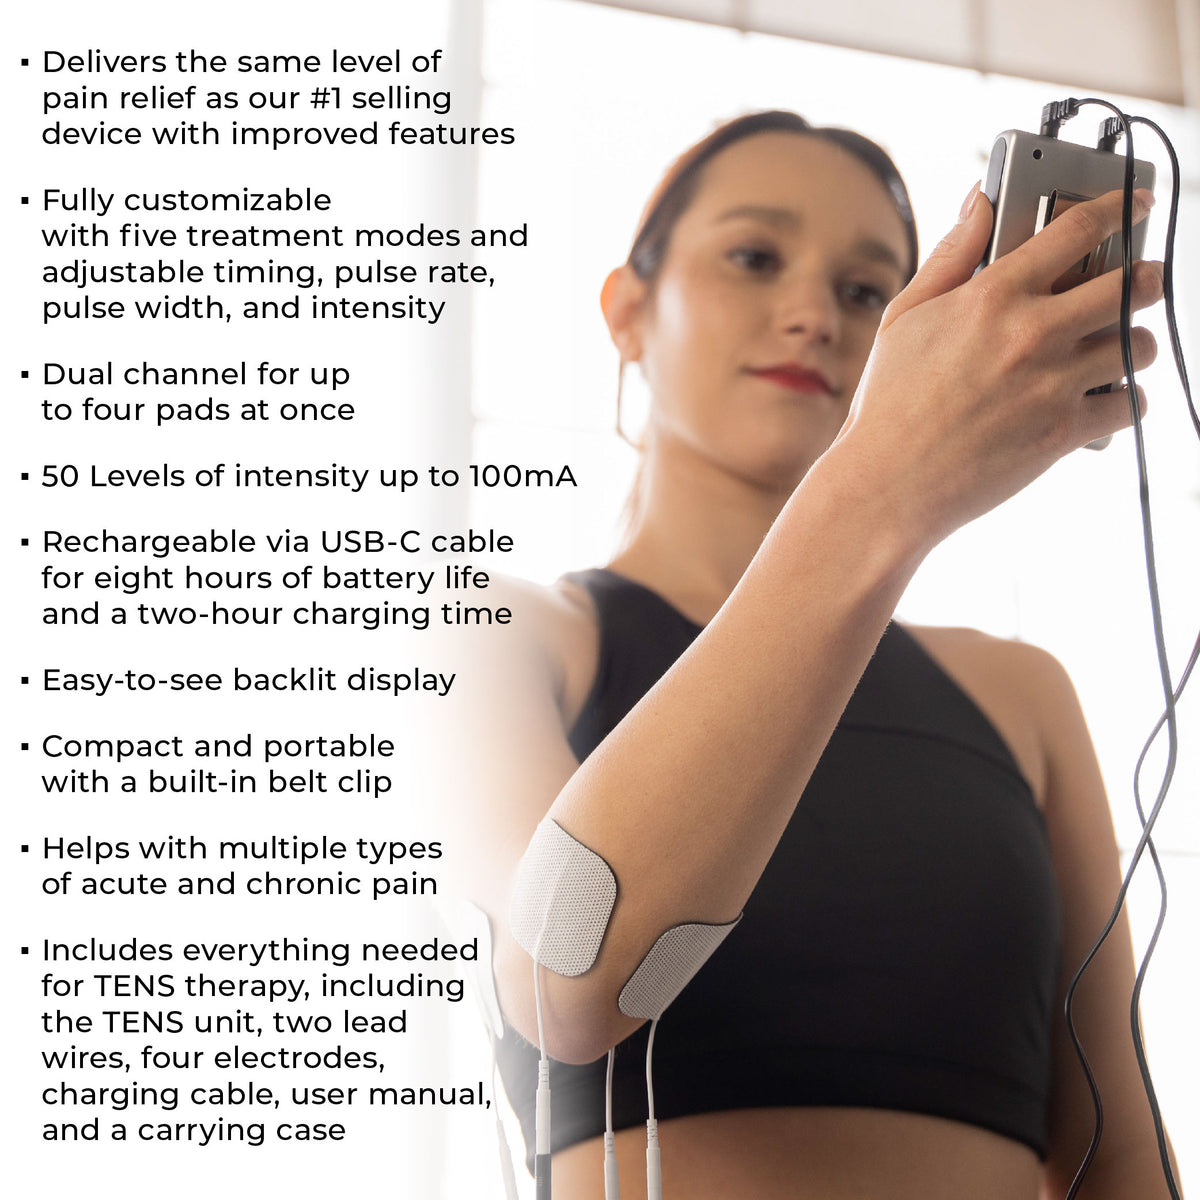 TENS 7000 Rechargeable TENS Unit Muscle Stimulator, 48 Pack Electrodes and  Pain Relief Device - Advanced TENS Machine for Effective Back Pain Relief